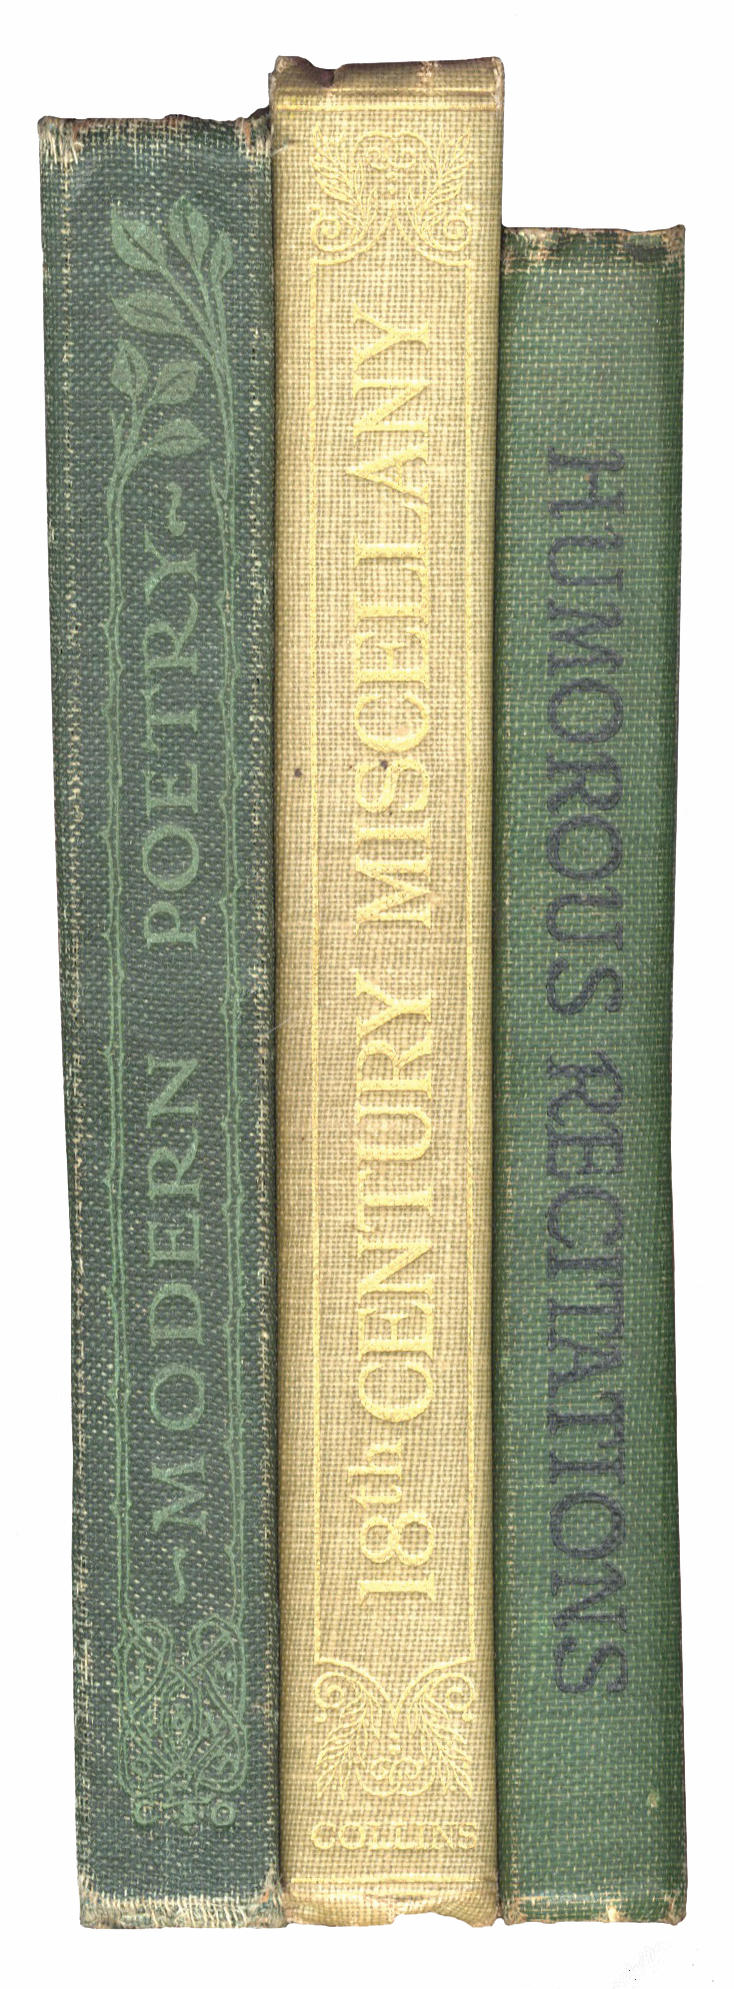 THOMAS (DYLAN) Books from the family library at Cwmdonkin Drive, Swansea, INSCRIBED, 1920-1927 (3)